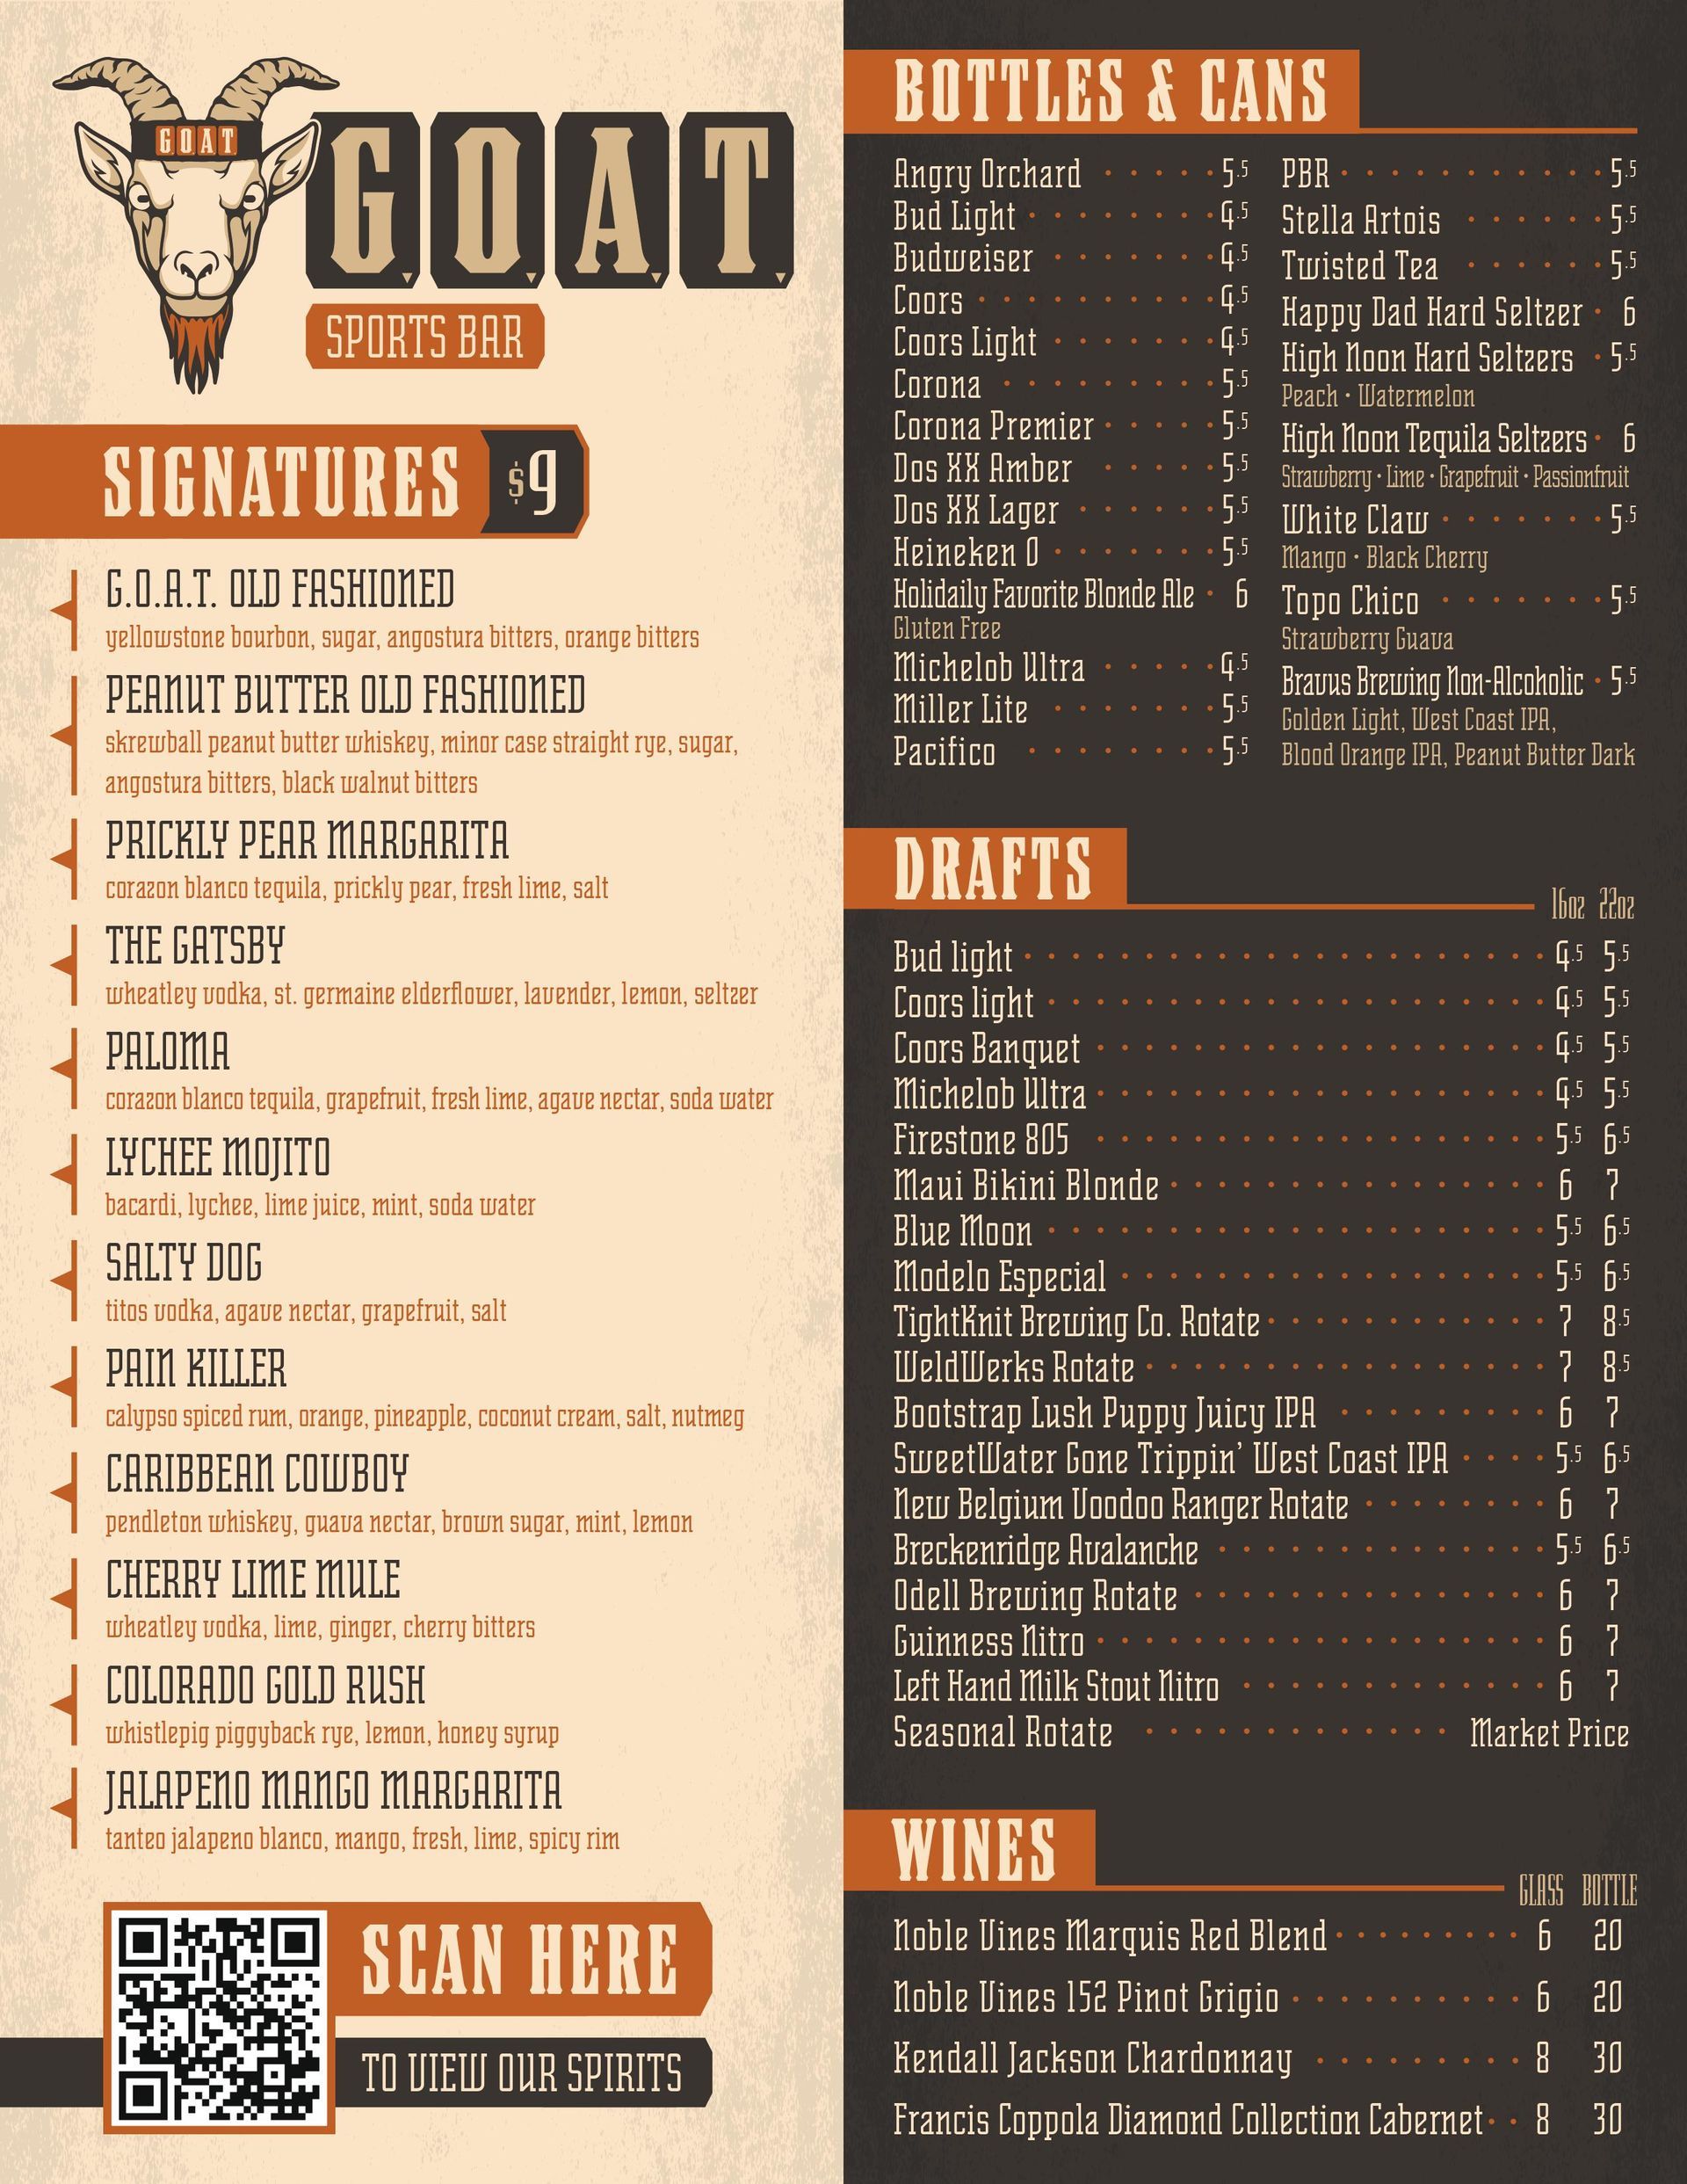 a menu for bottles and cans, cocktails and drafts